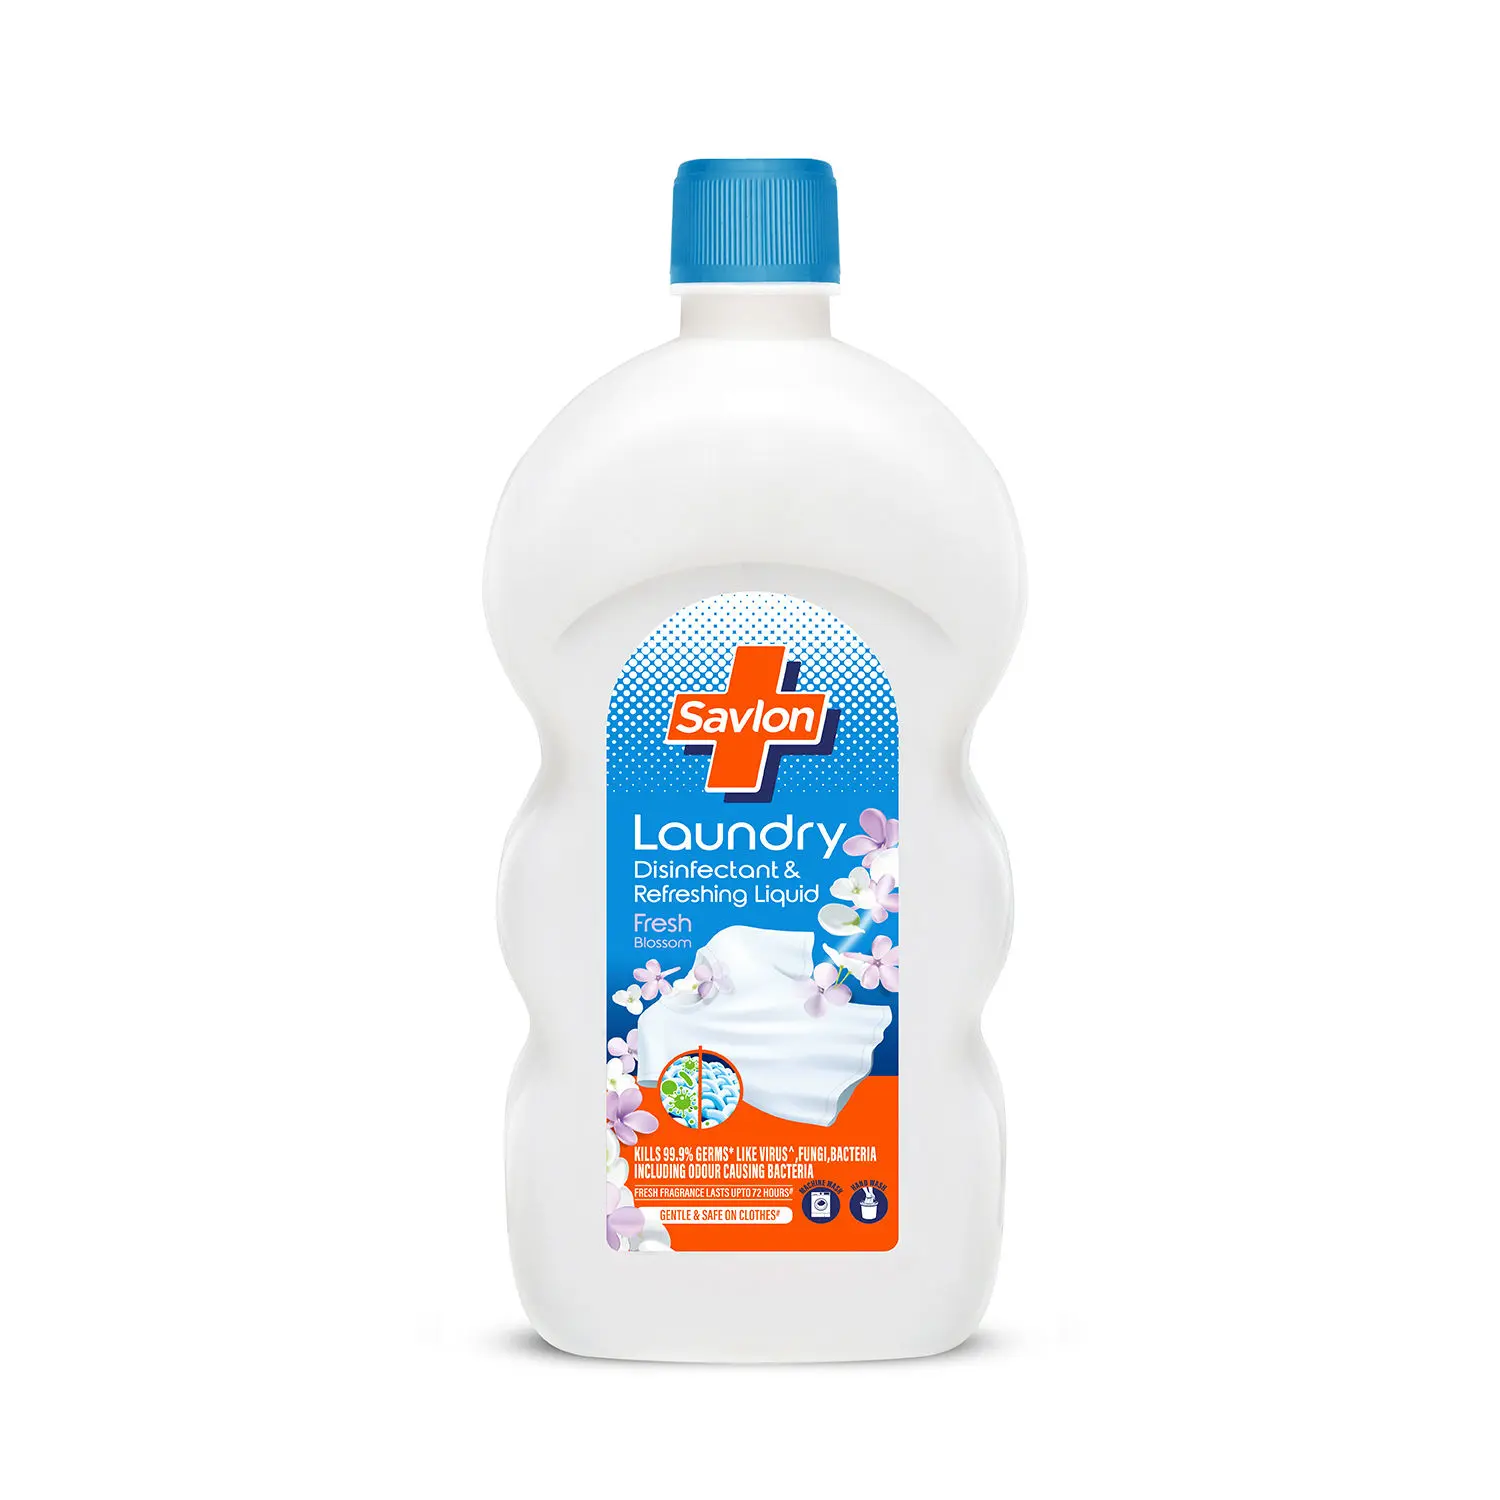 Savlon Laundry Disinfectant & Refreshing Liquid 1000ml| After Detergent Wash|Kills germs on clothes|Fresh fragrance lasts upto 72 hrs|Safe on clothes, Natural